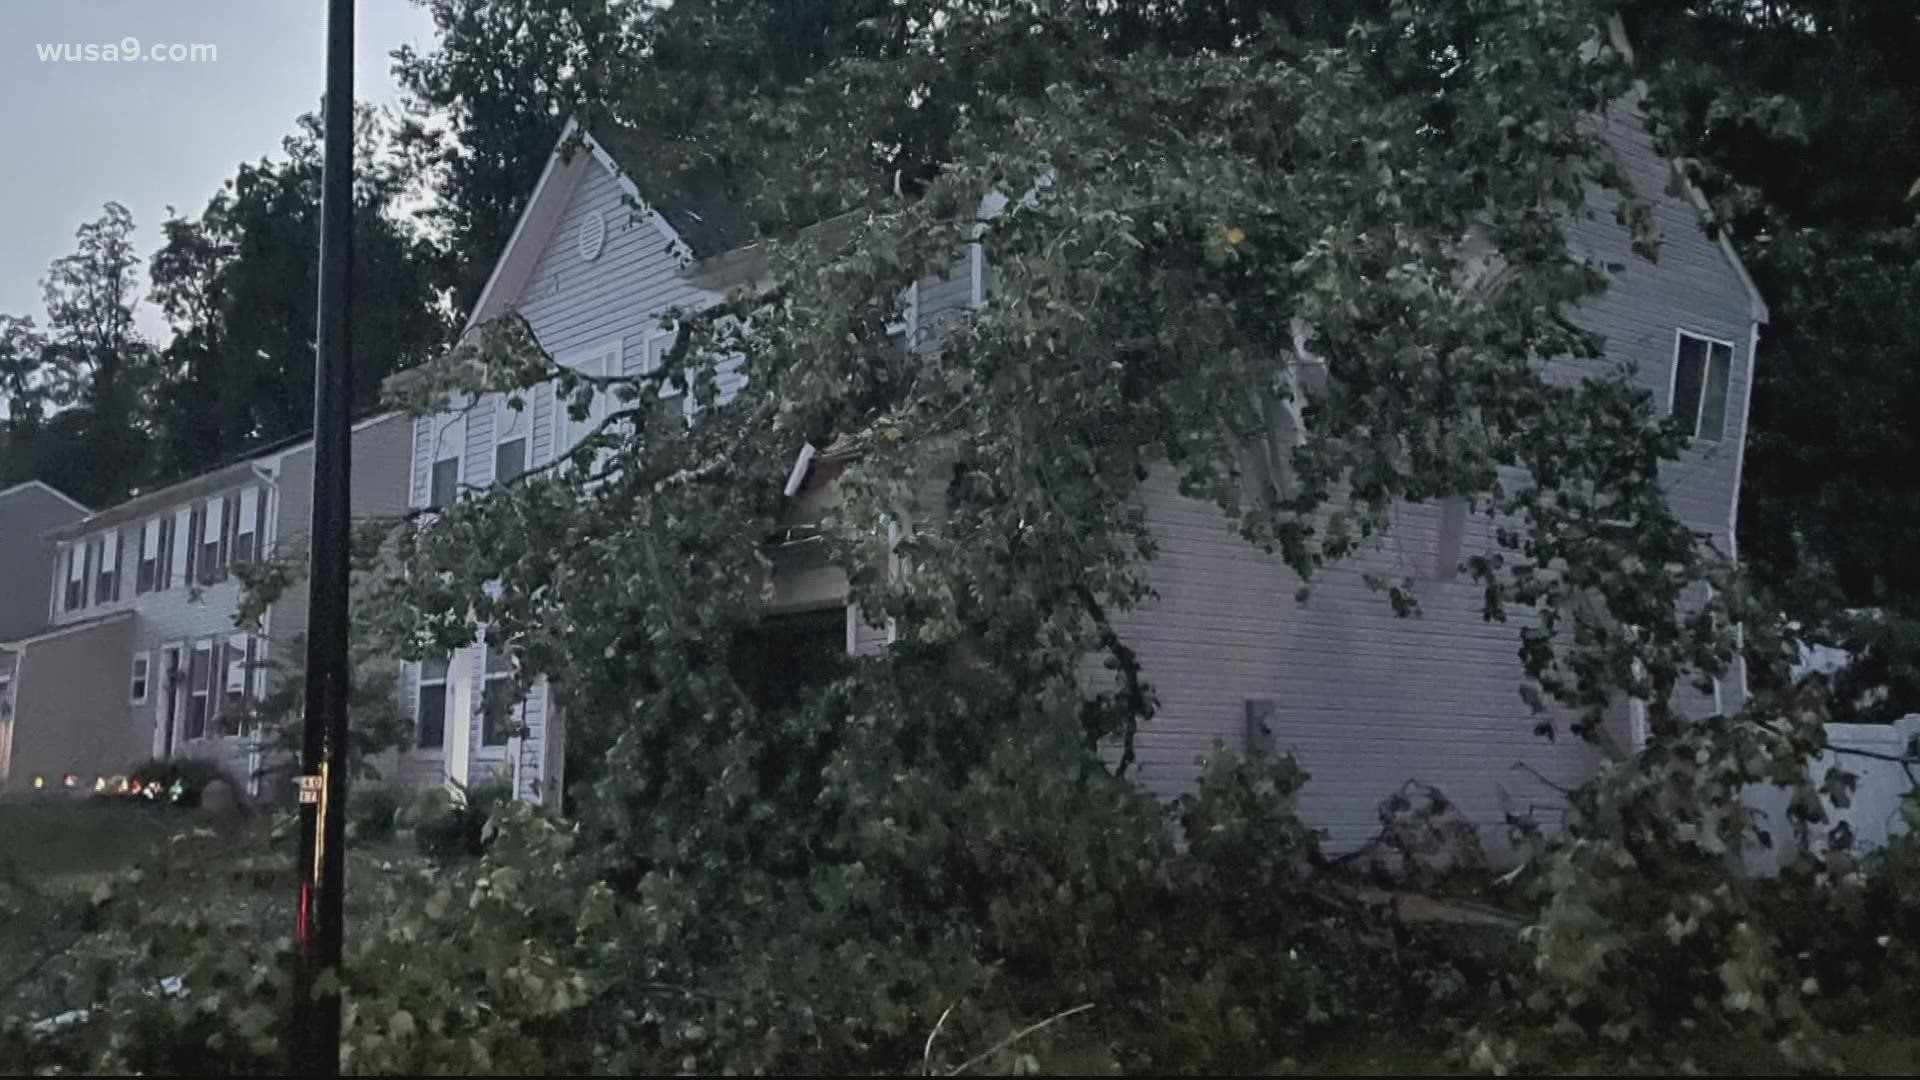 Severe weather caused trees and power lines to fall to the ground while thousands were left without power.